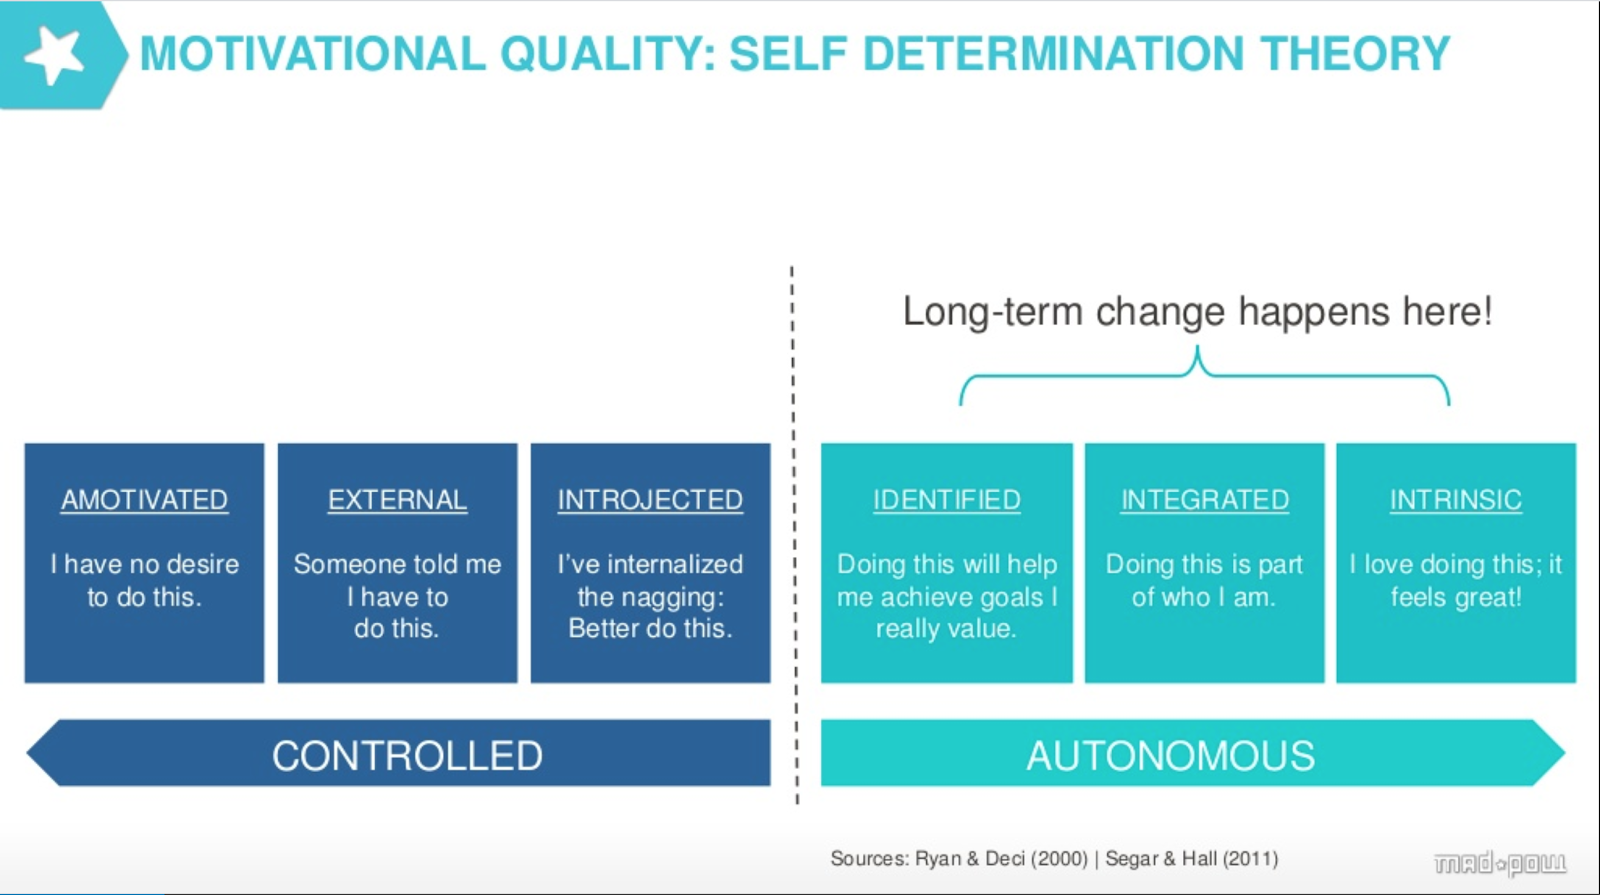 In the self determination theory the quality of an individual's motivation falls along a continuum where the most impactful behavioral changes happen from intrinsic motivations vs extrinsic motivations.